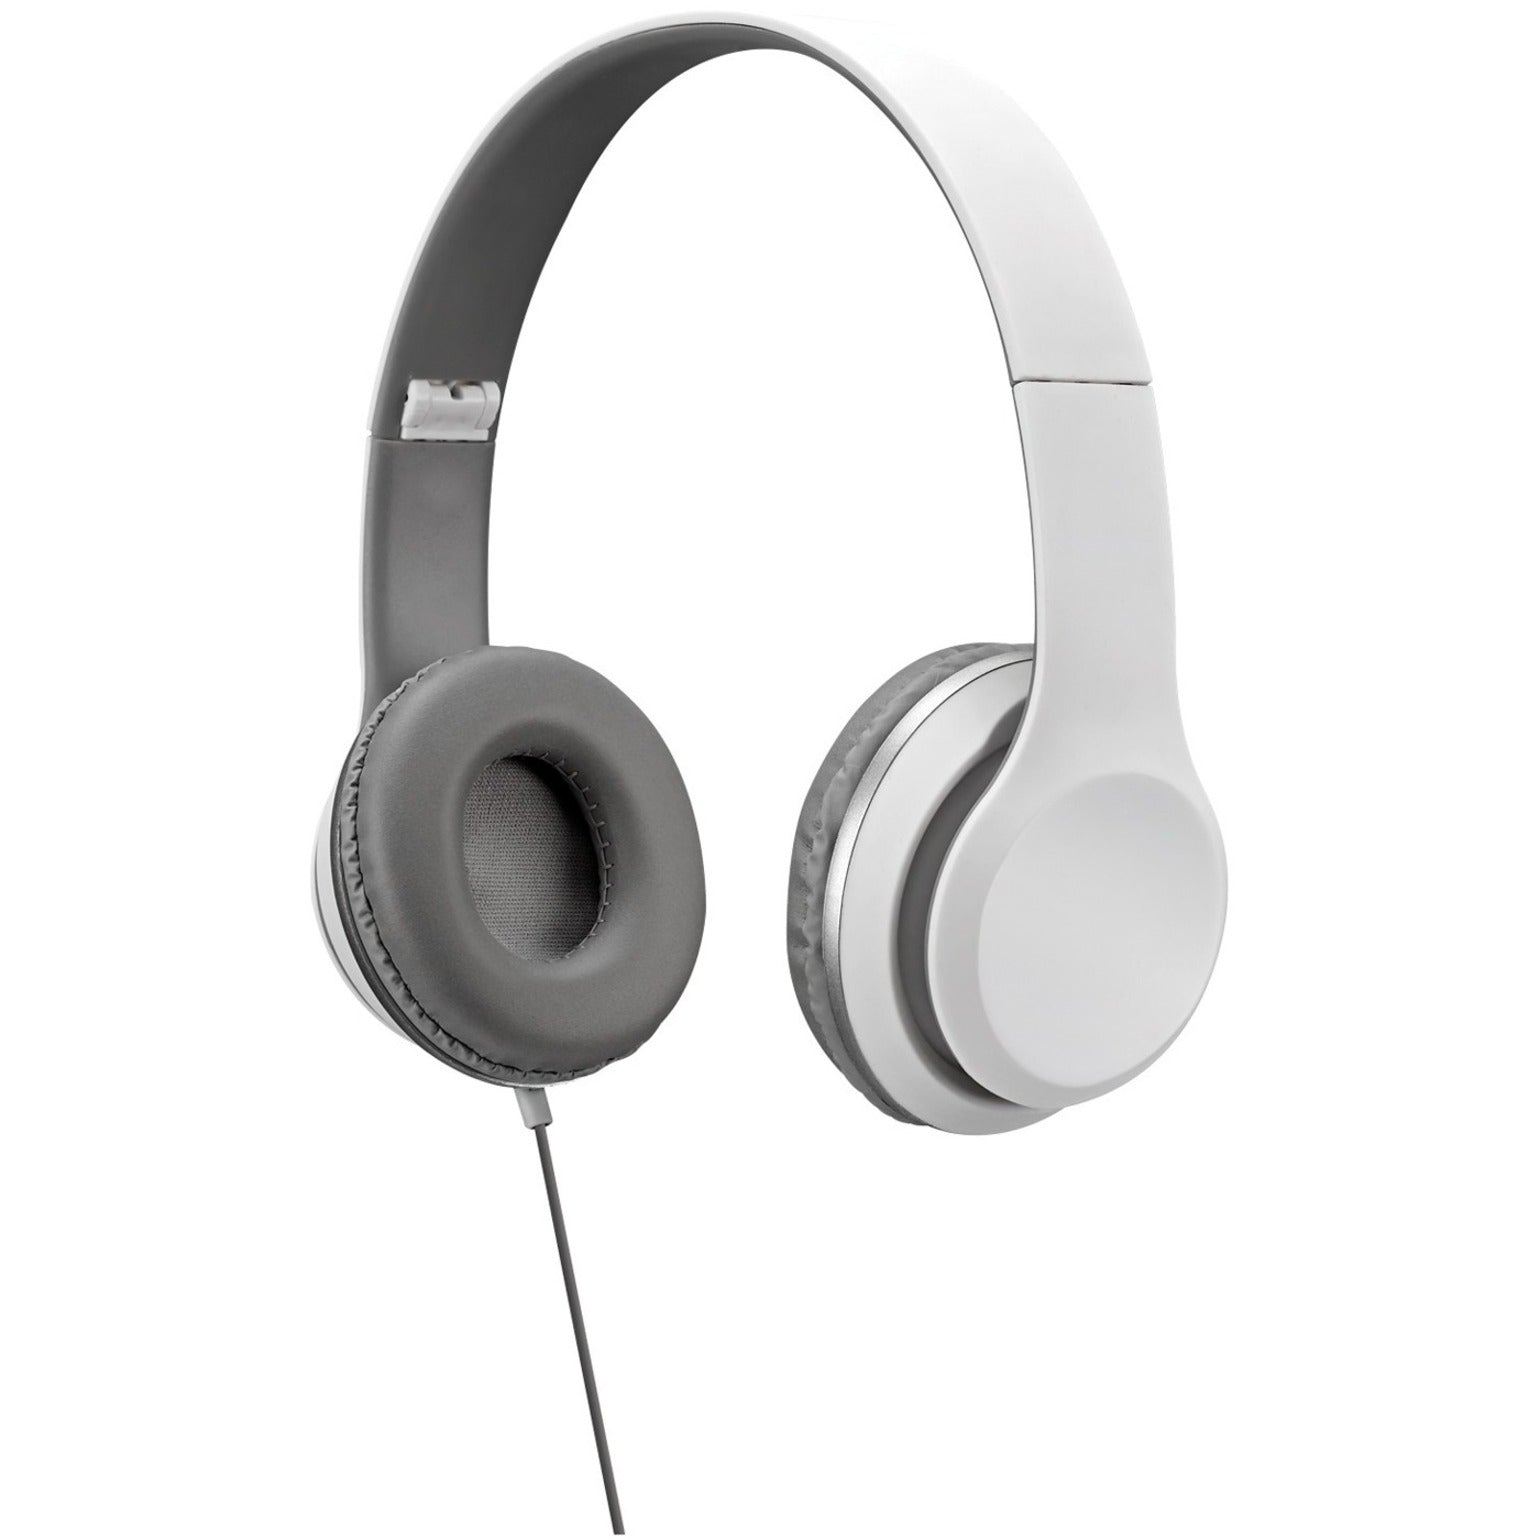 iLive IAH57W Stereo Headphones, Over-the-head, 32 Ohm, Wired, White